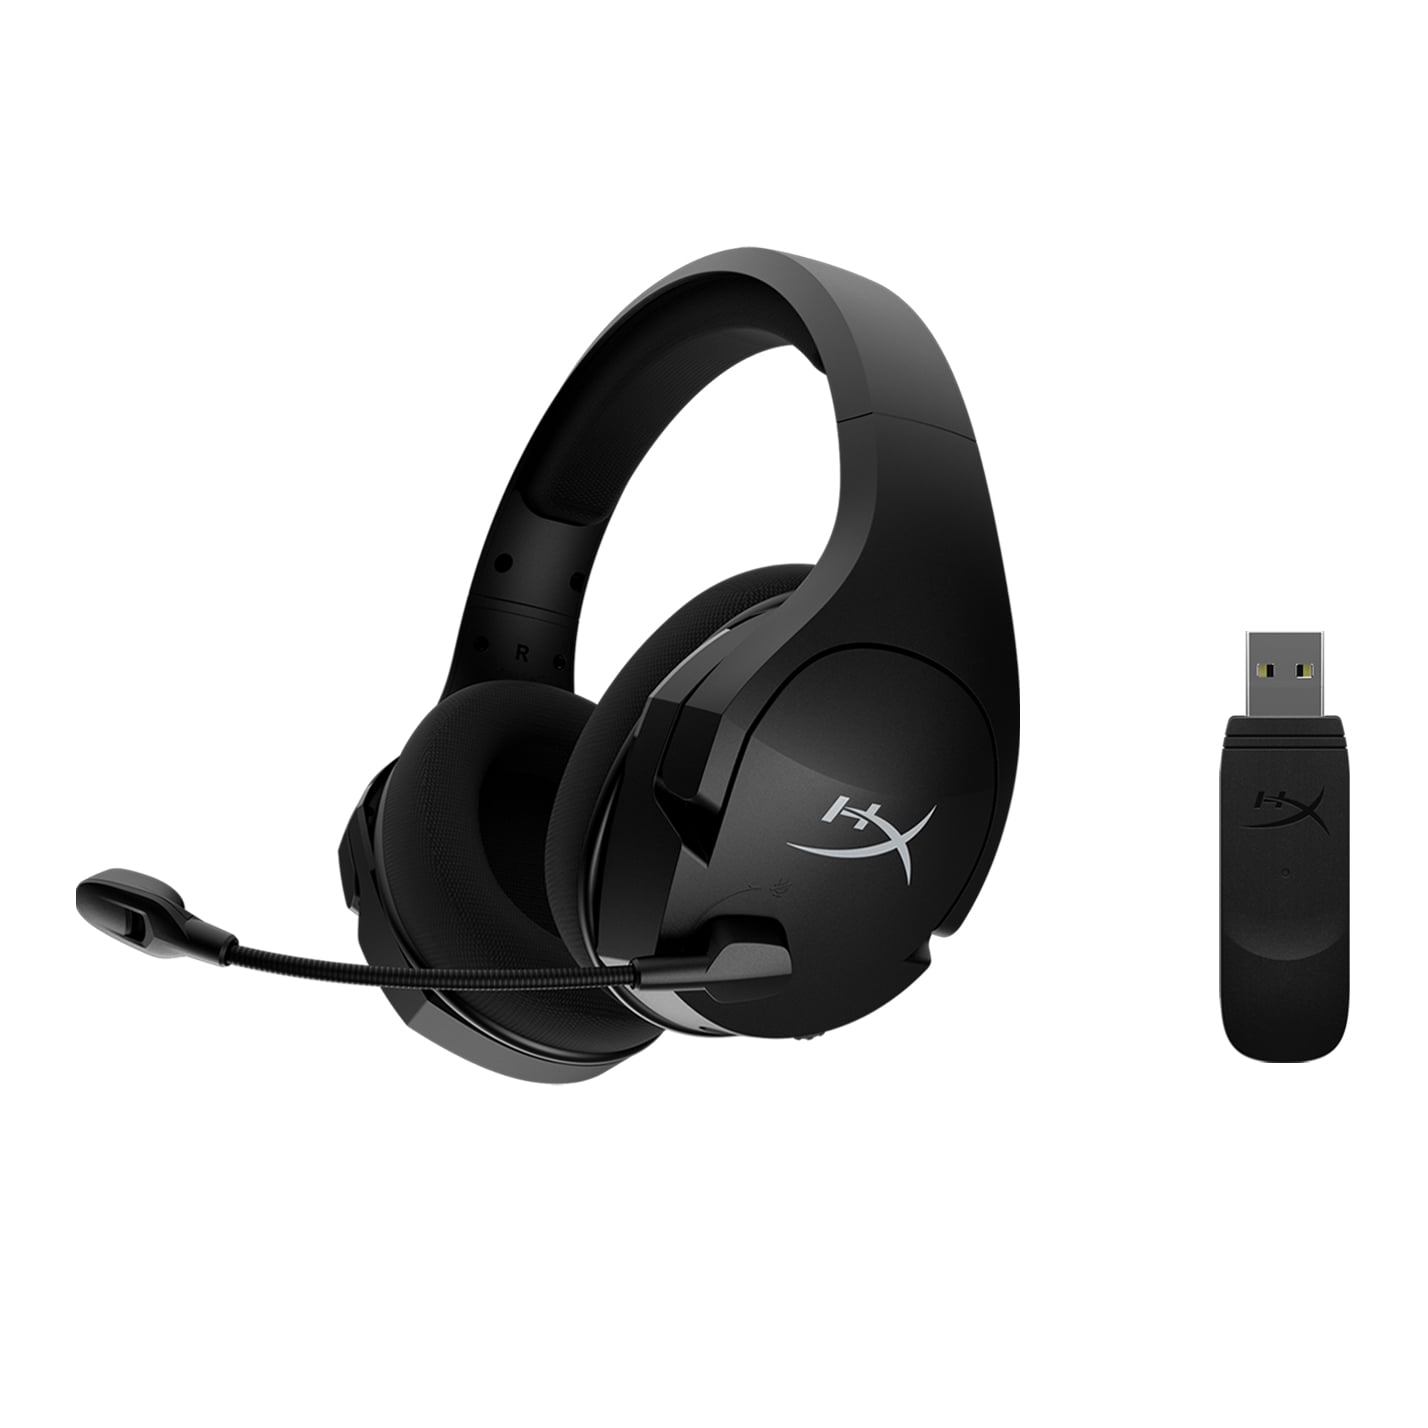 HyperX Cloud Stinger - Wireless Gaming Headset, for PC, 7.1 Surround Sound, Noise Cancelling Microphone, Lightweight - Walmart.com